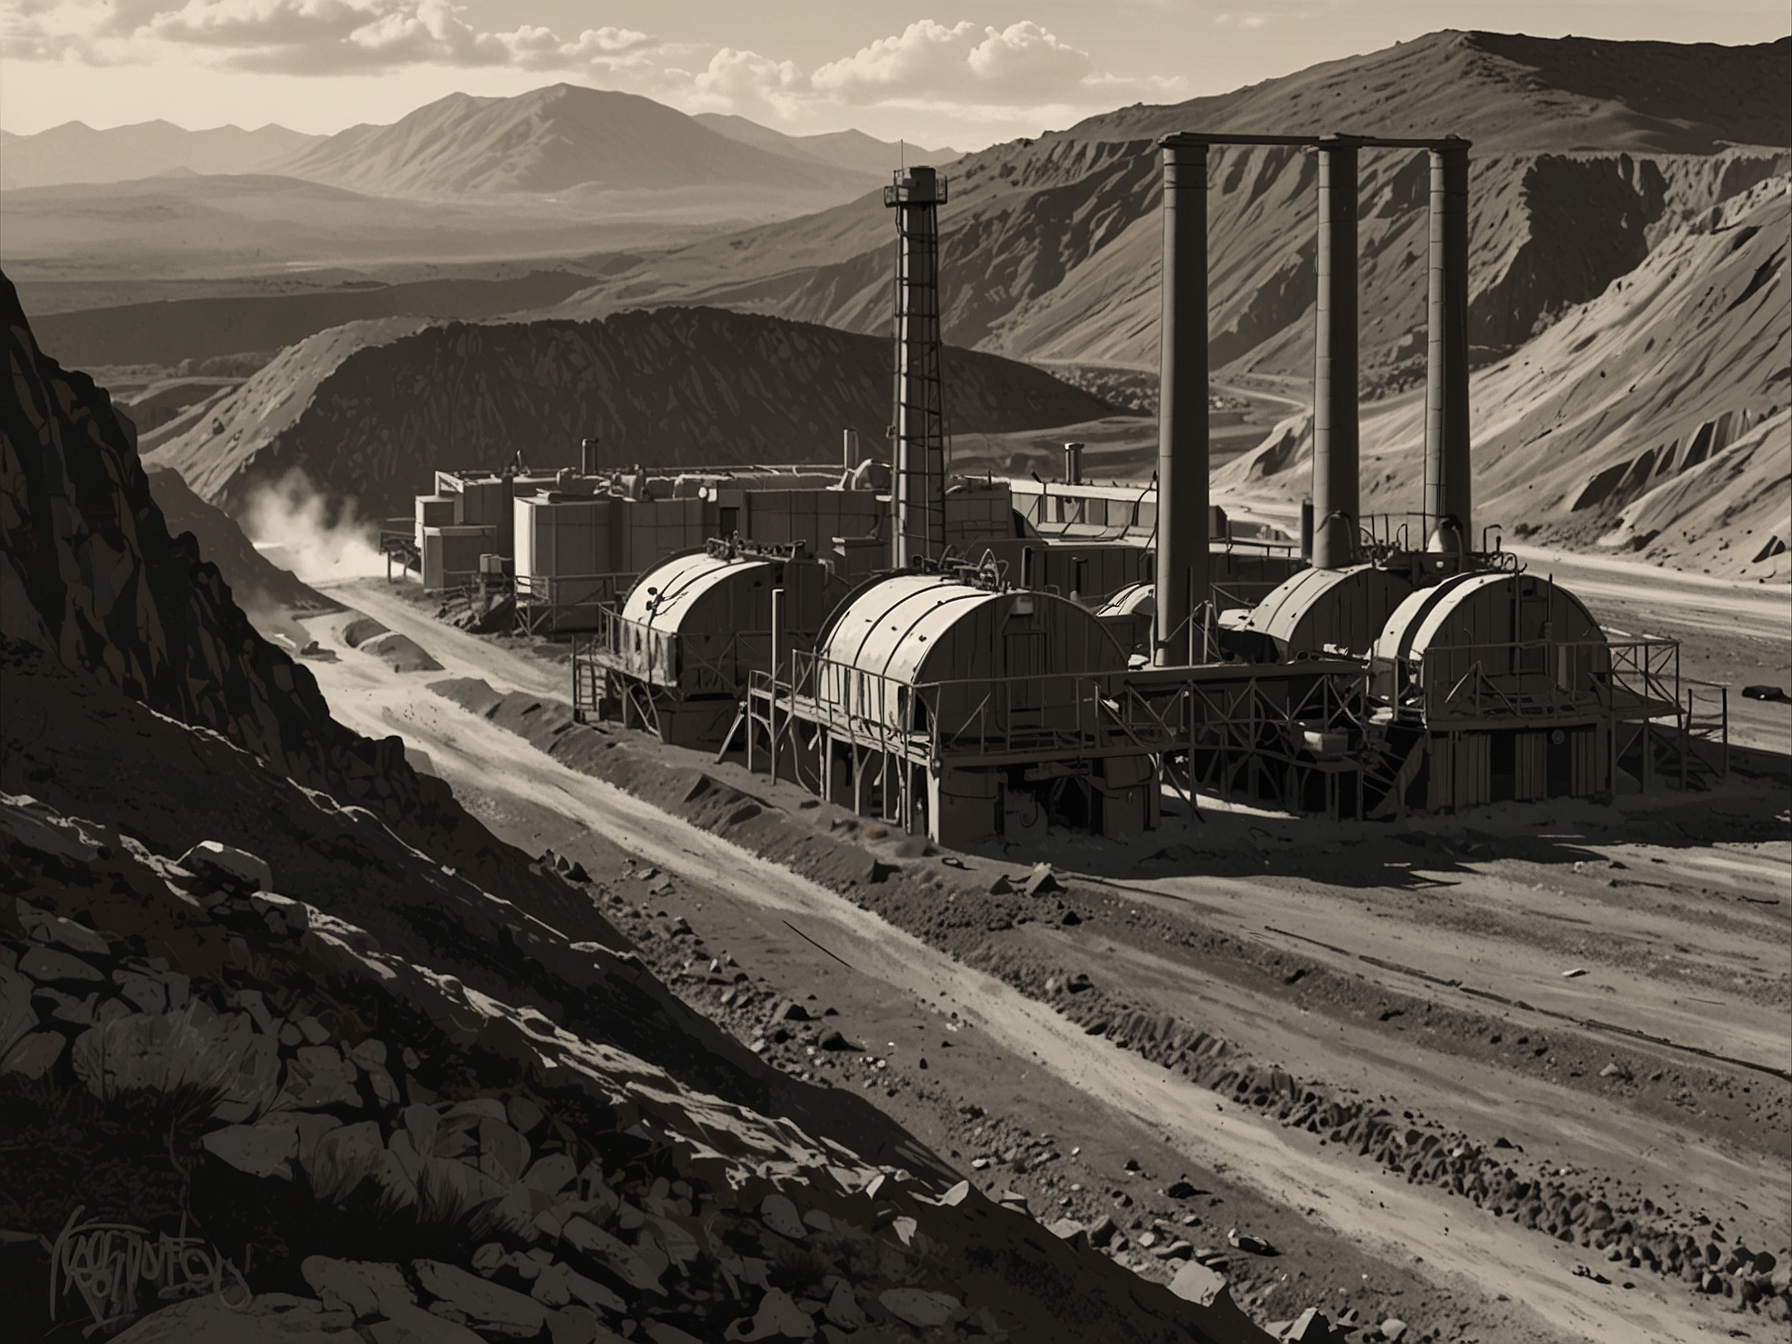 A picturesque view of a mining site representing Lancaster Resources, emphasizing their commitment to sustainable and environmentally friendly operations.